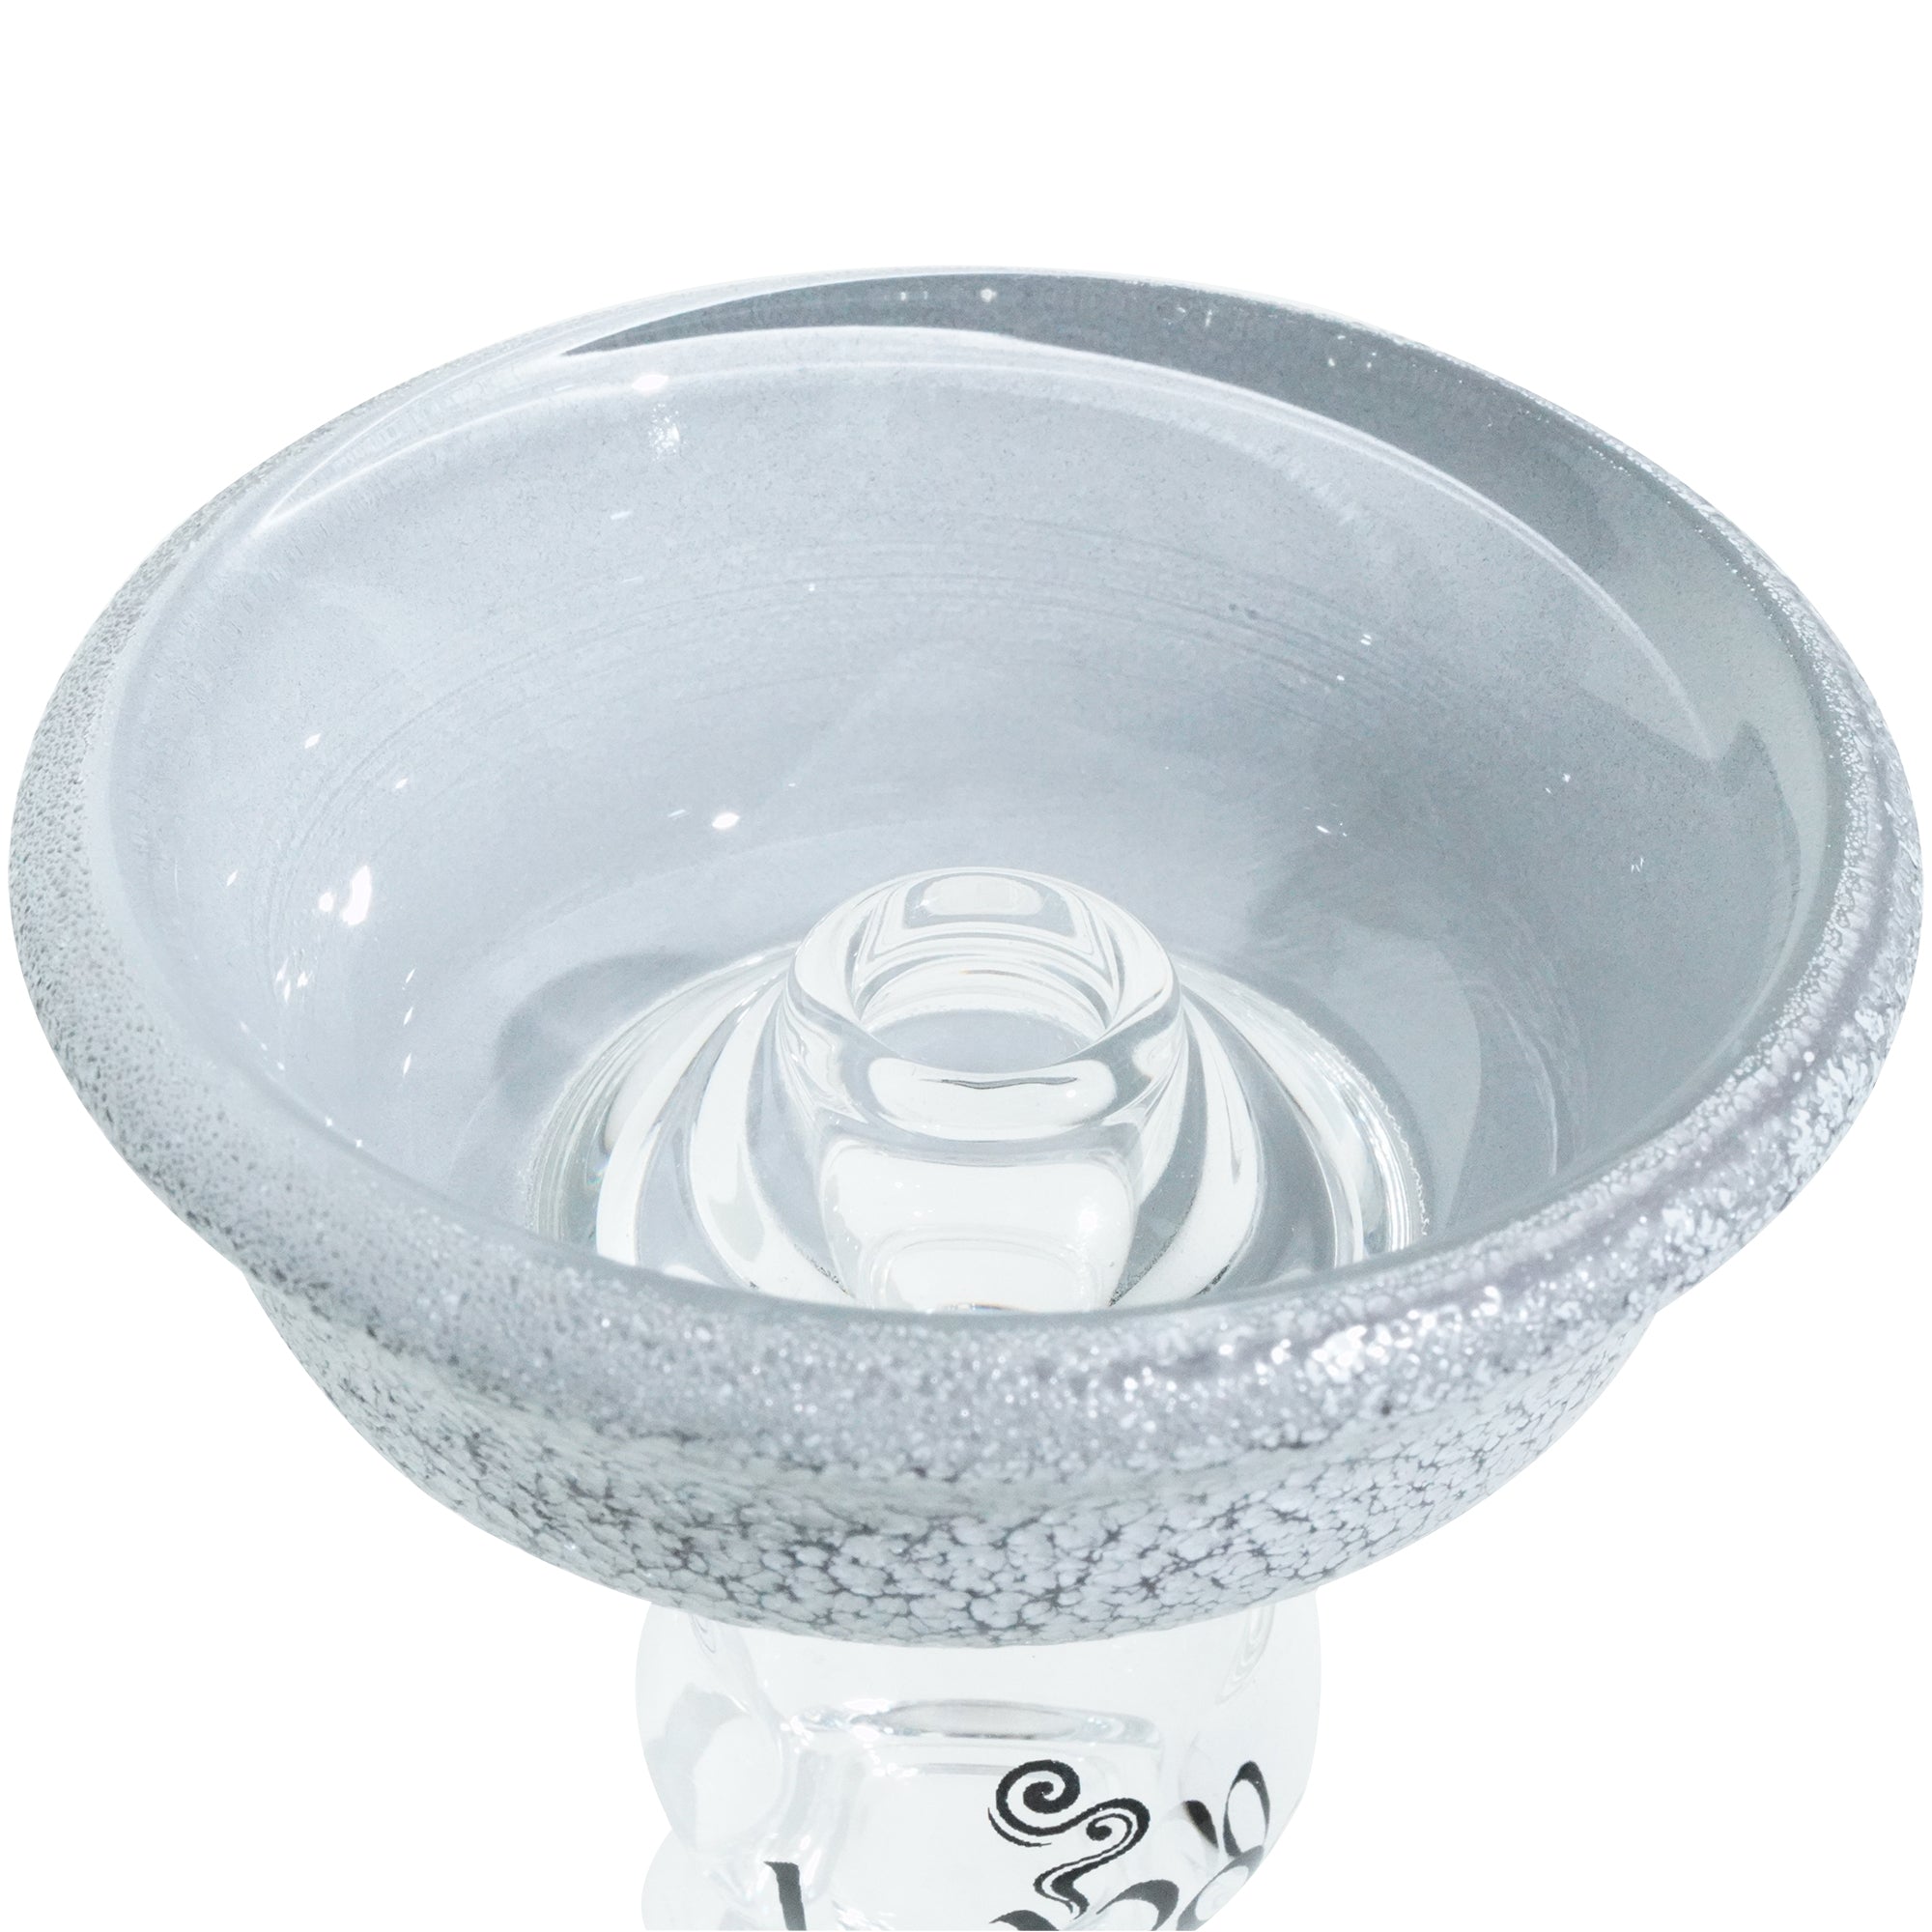 Lavoo Ceramic Bowl | Stogz | Find Your High